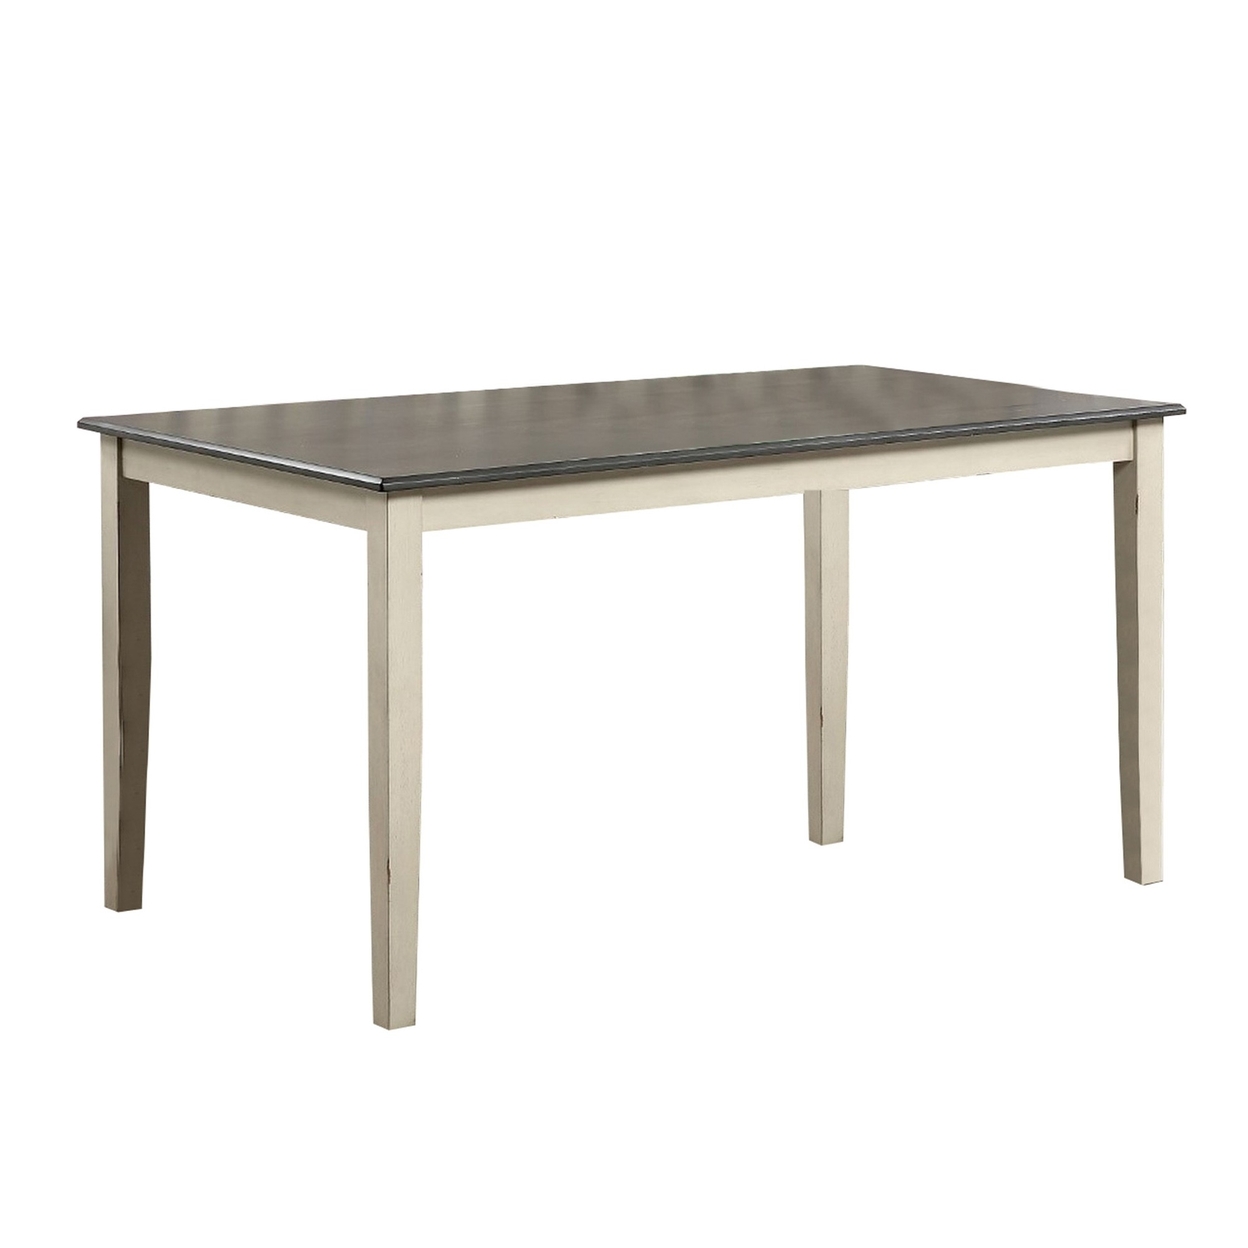 Two Tone Wooden Dining Table With Block Legs, White- Saltoro Sherpi